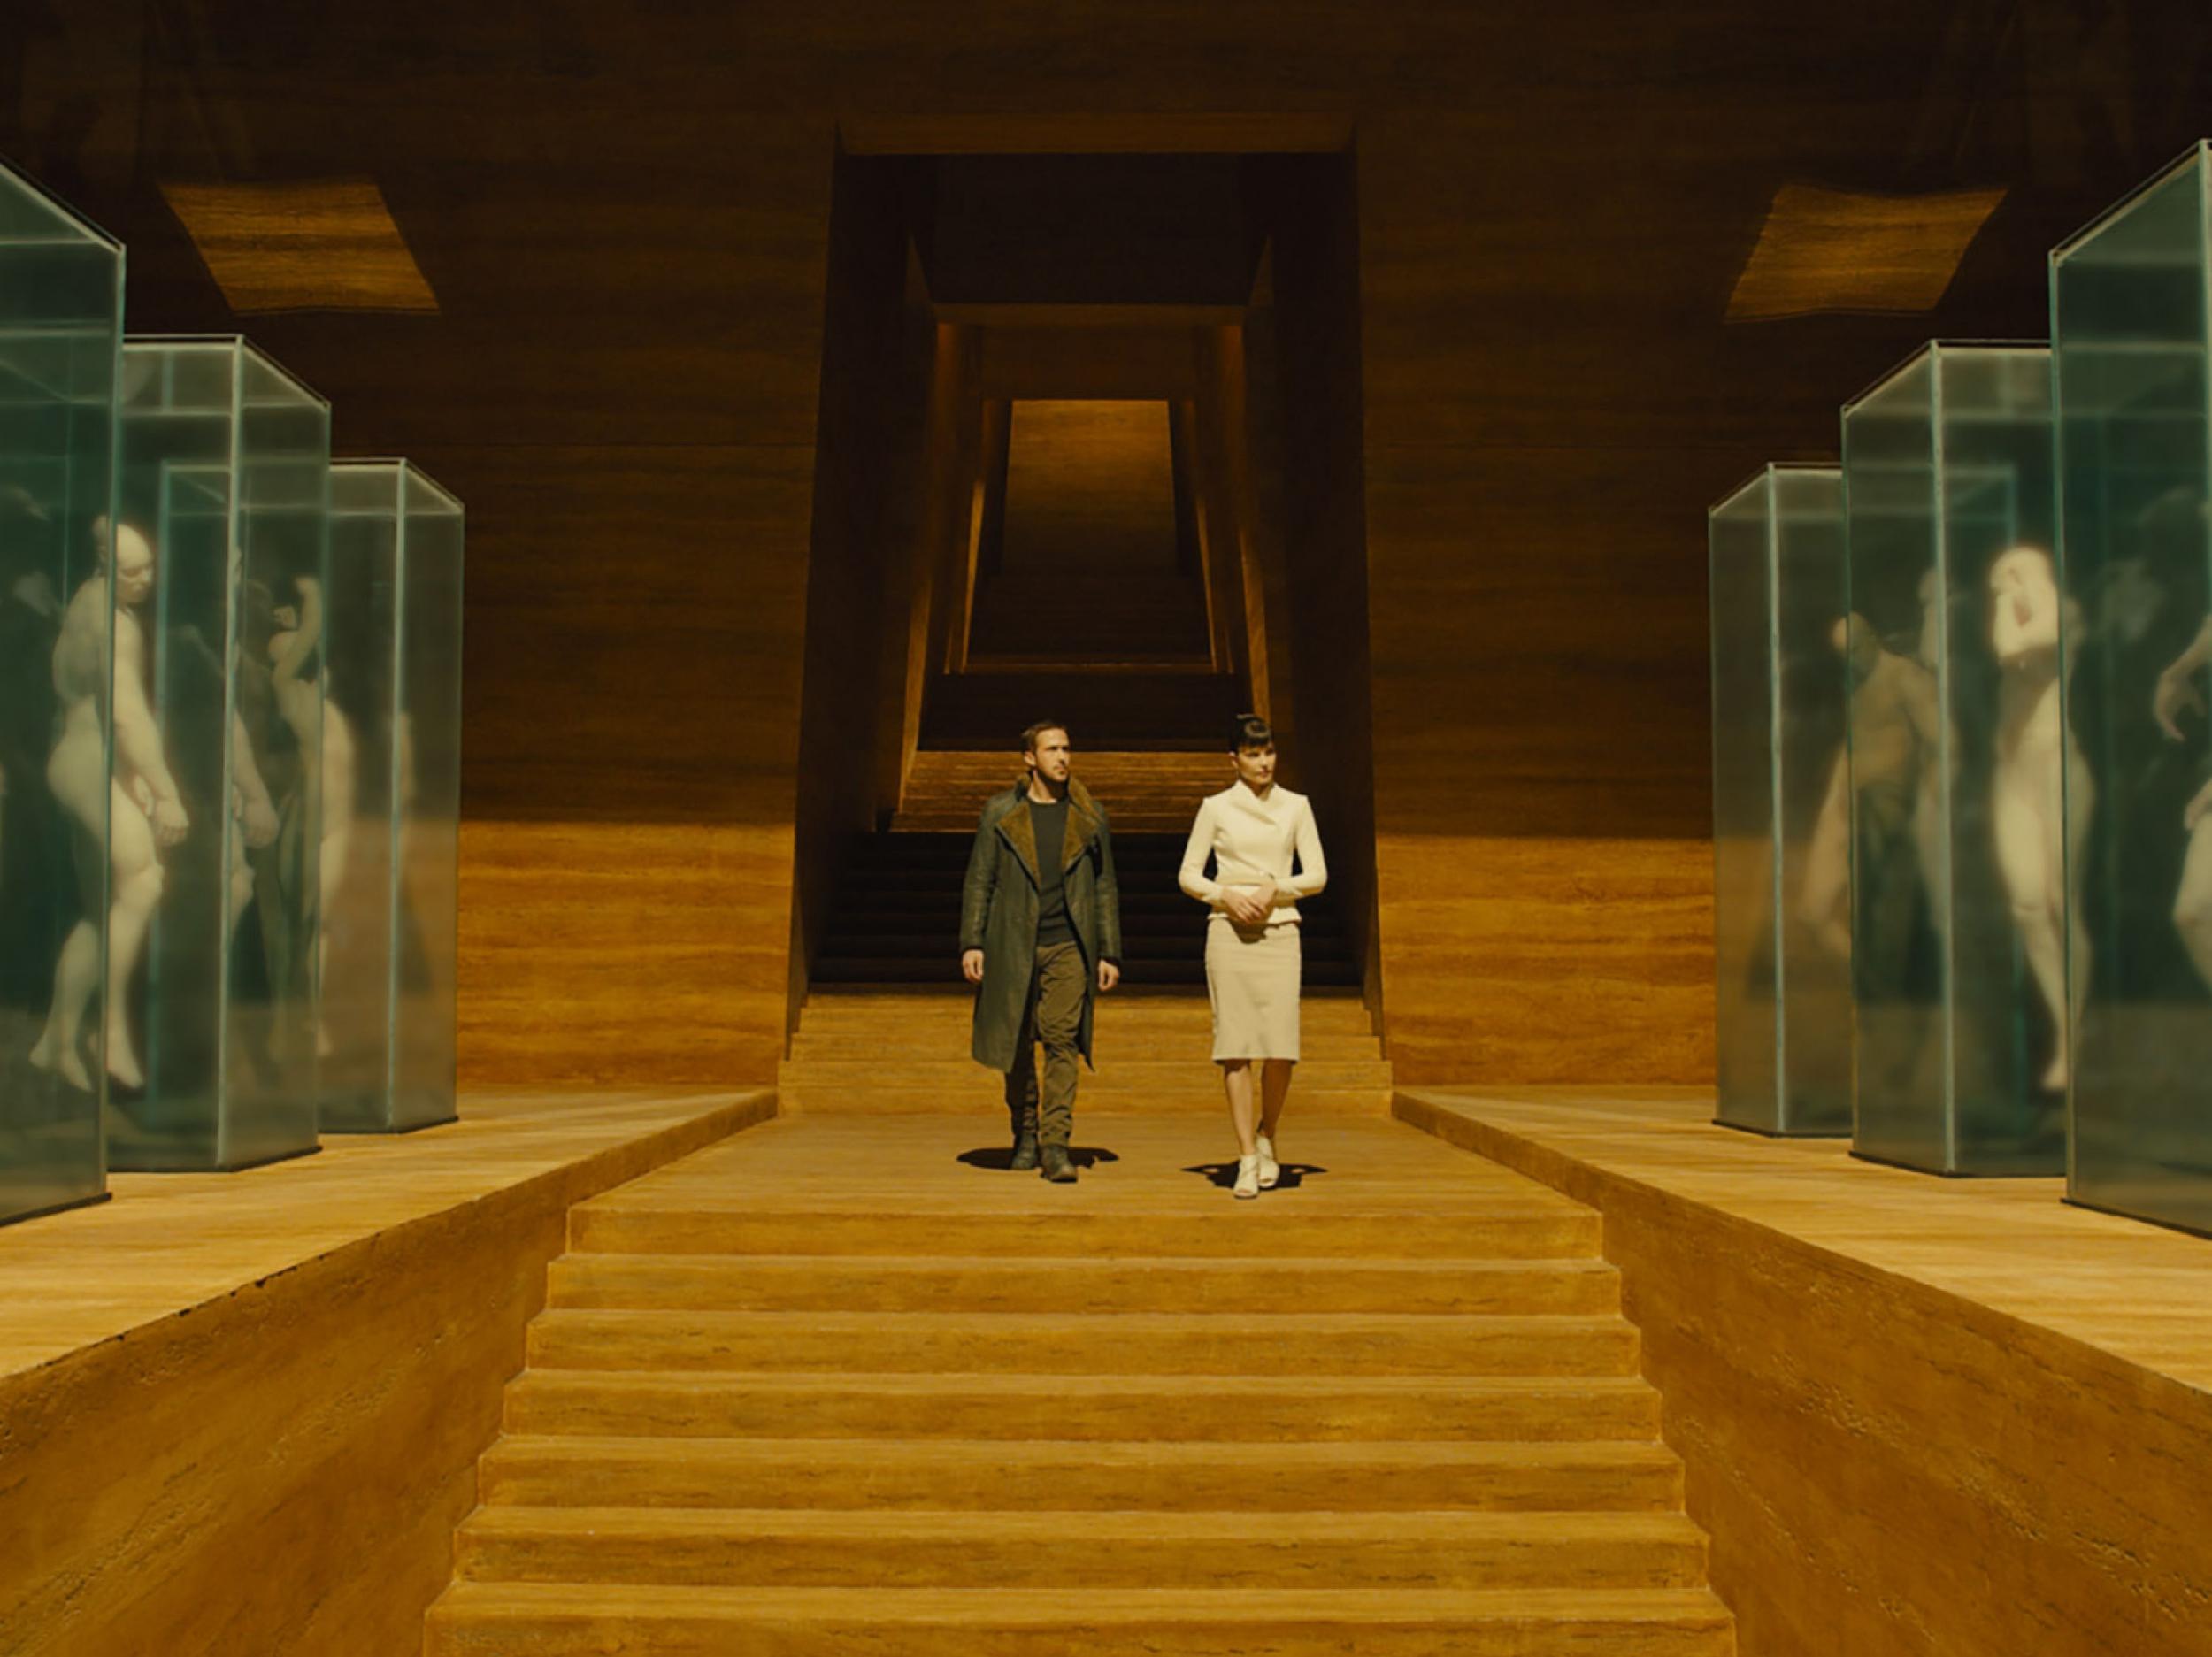 How Rachael was brought back to life in 'Blade Runner 2049', Features